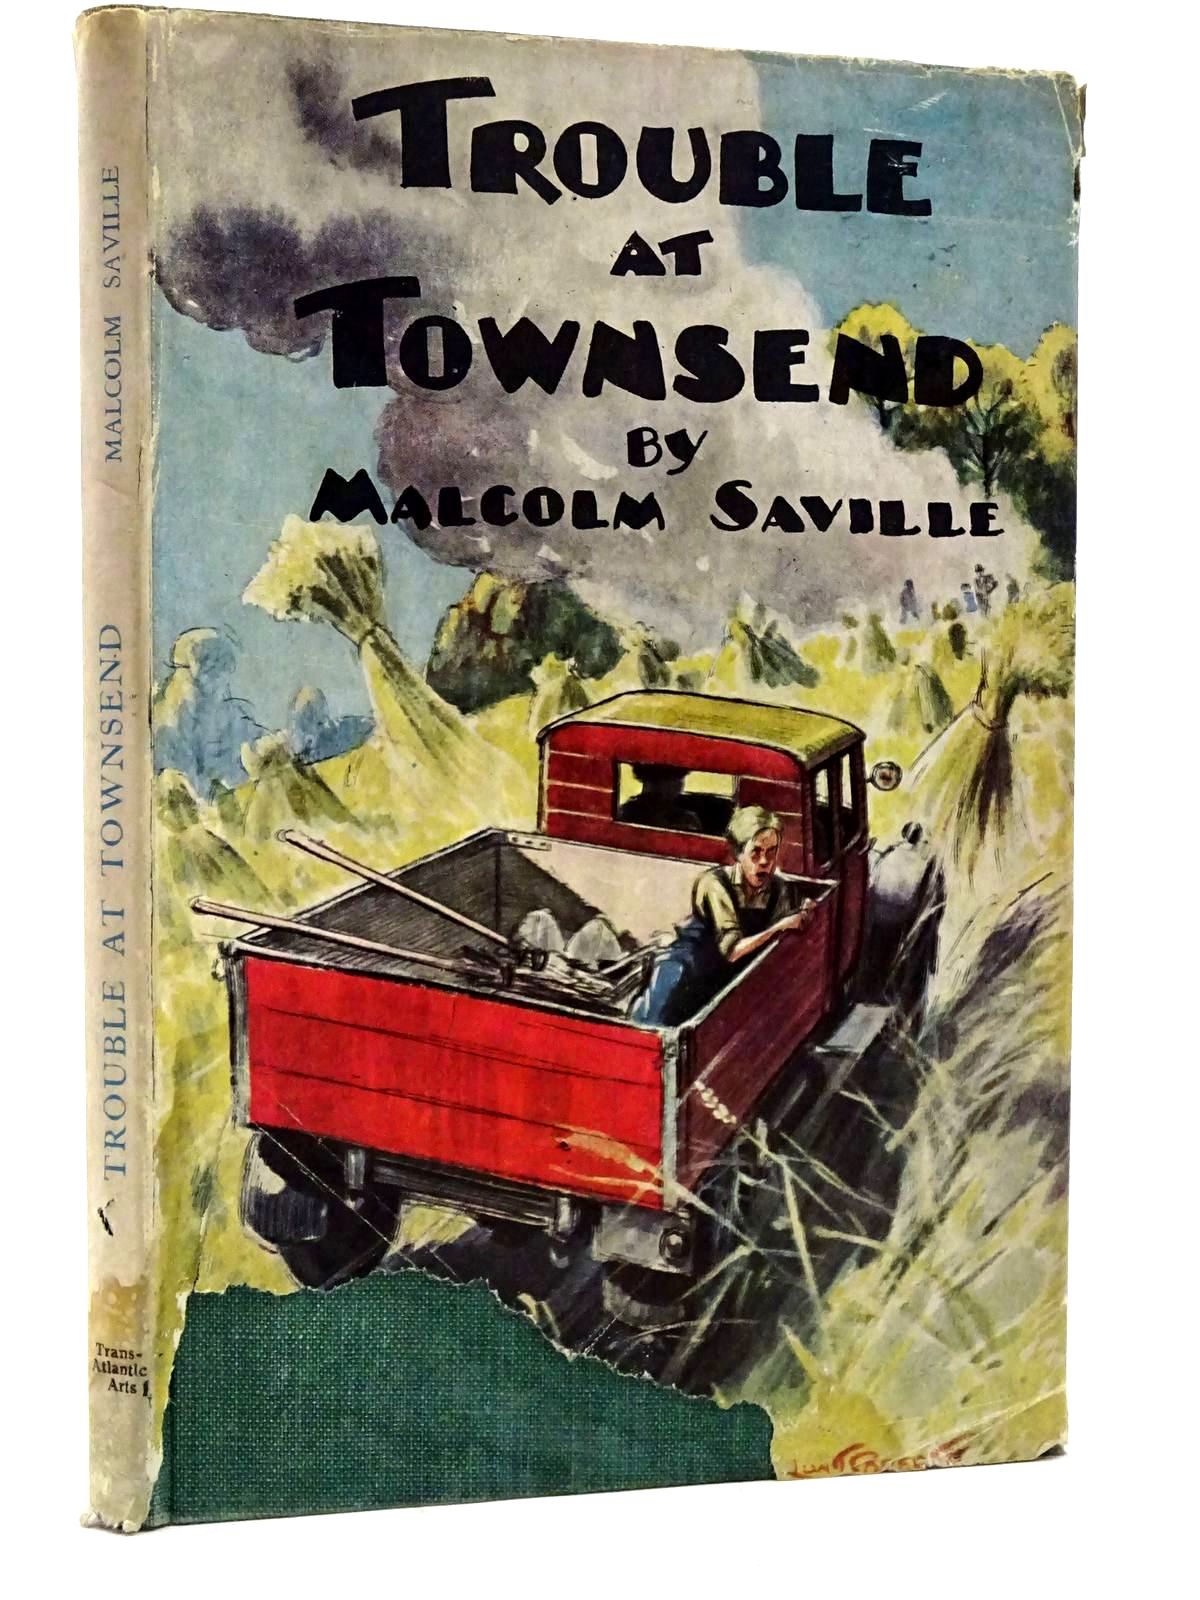 Photo of TROUBLE AT TOWNSEND written by Saville, Malcolm illustrated by Roberts, Lunt published by Transatlantic Arts Ltd. (STOCK CODE: 2131550)  for sale by Stella & Rose's Books